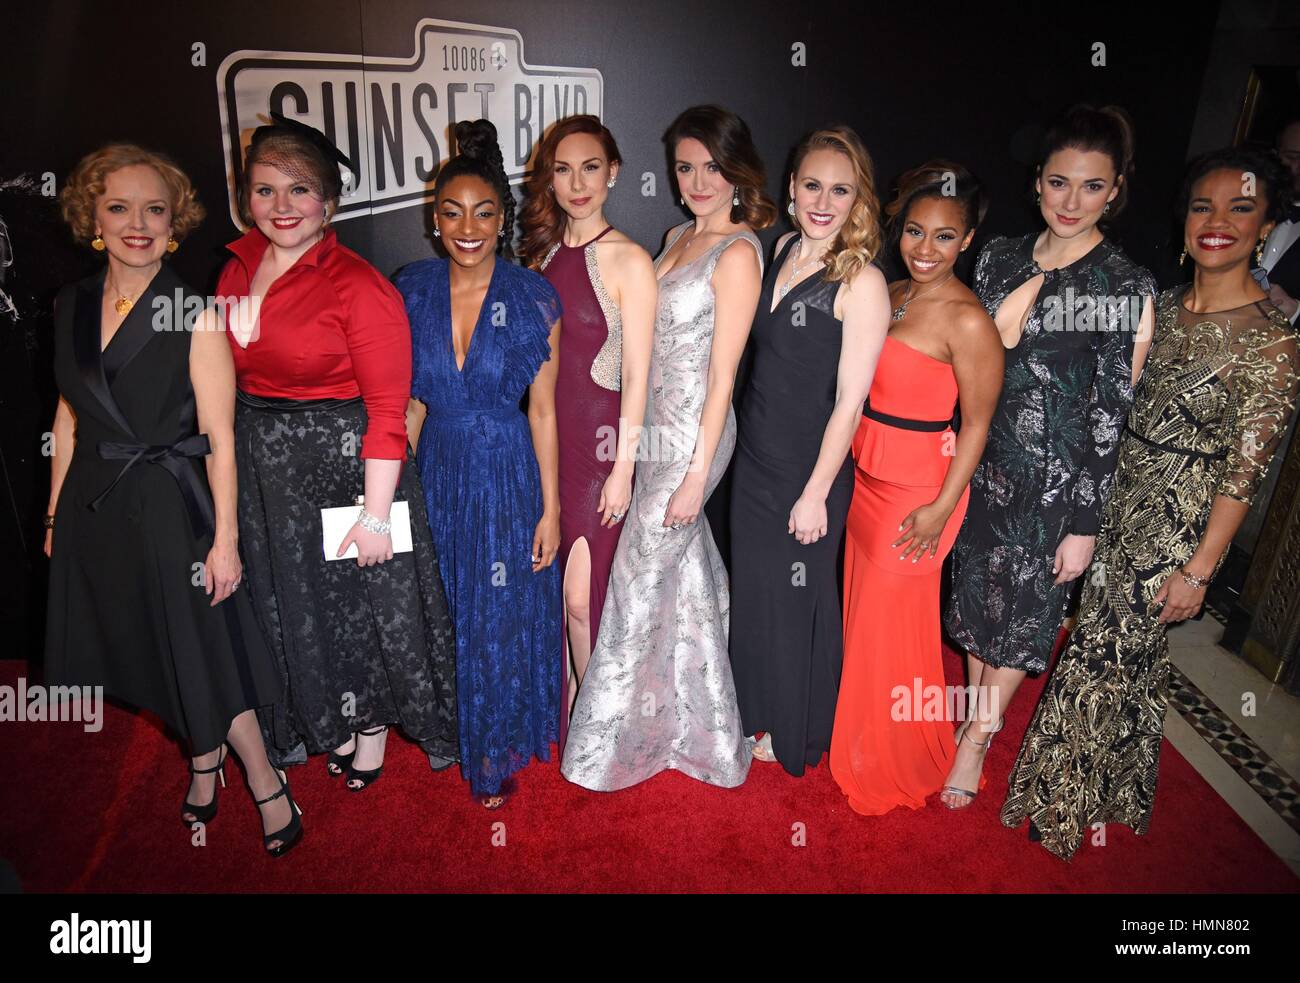 New York, NY, USA. 9th Feb, 2017. Nancy Anderson, Katie Ladner, Anissa Felix, Lauralyn McClelland, Mackenzie Bell, Stephanie Martignetti, Britney Johnson, Stephanie Rothenberg, Britney Coleman in attendance for SUNSET BOULEVARD Revival Opening Night on Broadway, Palace Theatre, New York, NY February 9, 2017. Credit: Derek Storm/Everett Collection/Alamy Live News Stock Photo